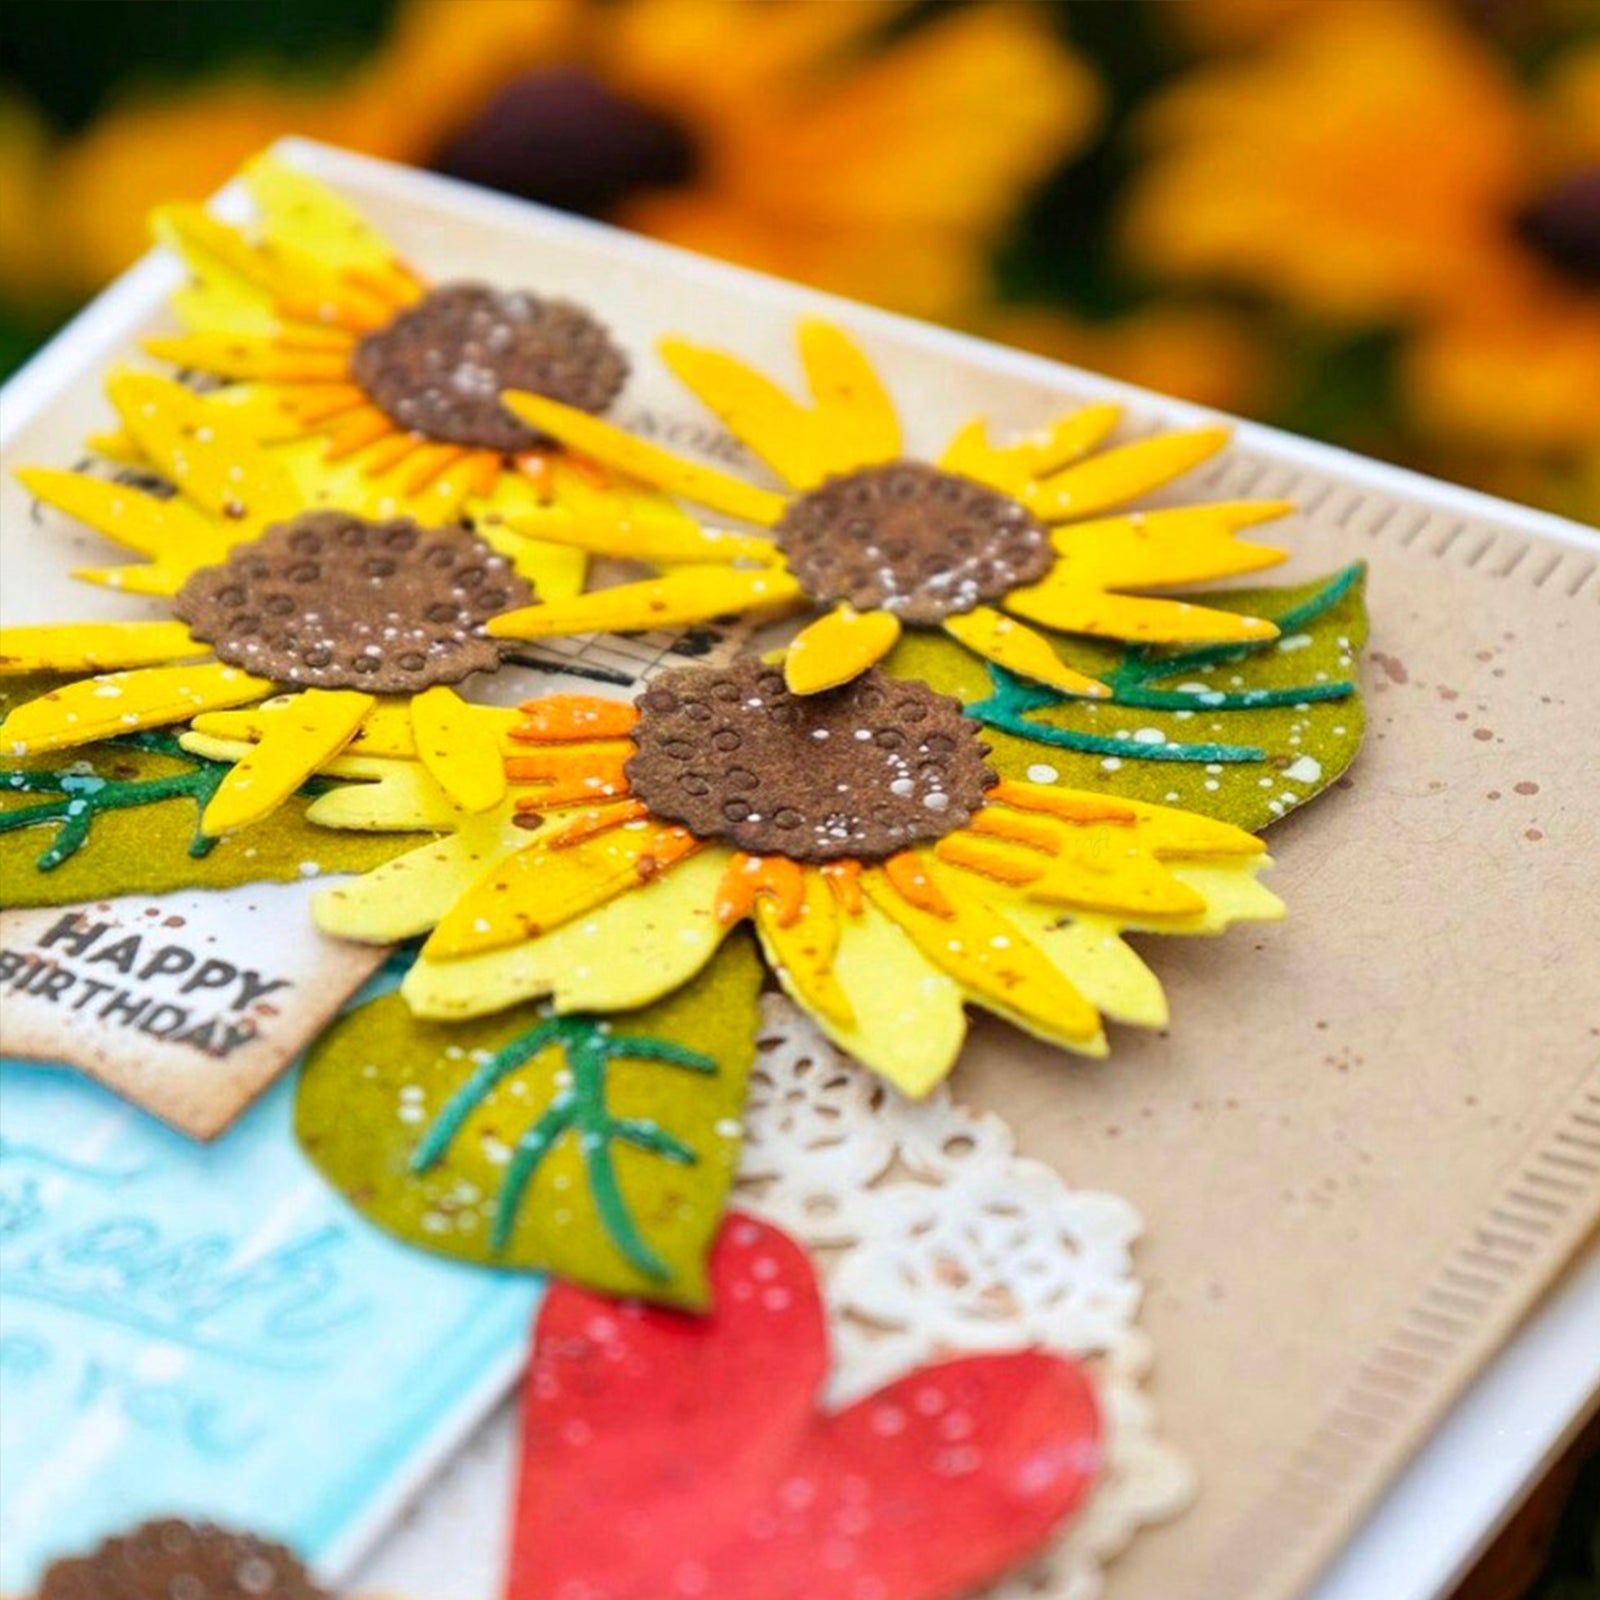 Build a Bunch of Daisies w Leaves Cutting & Embossing Dies